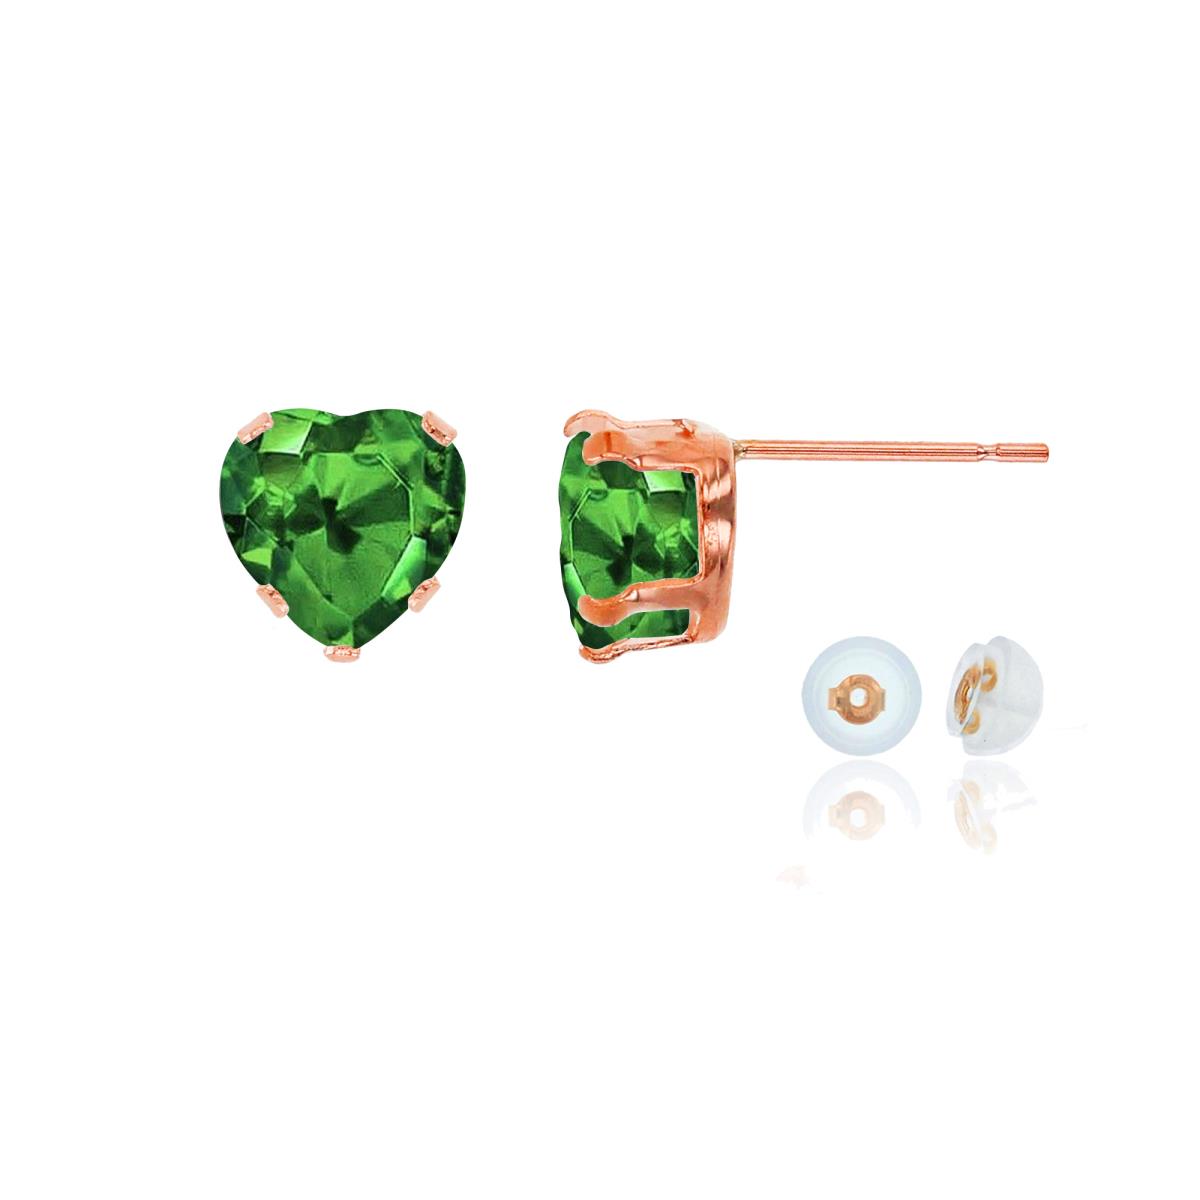 10K Rose Gold 5x5mm Heart Cr Emerald Stud Earring with Silicone Back